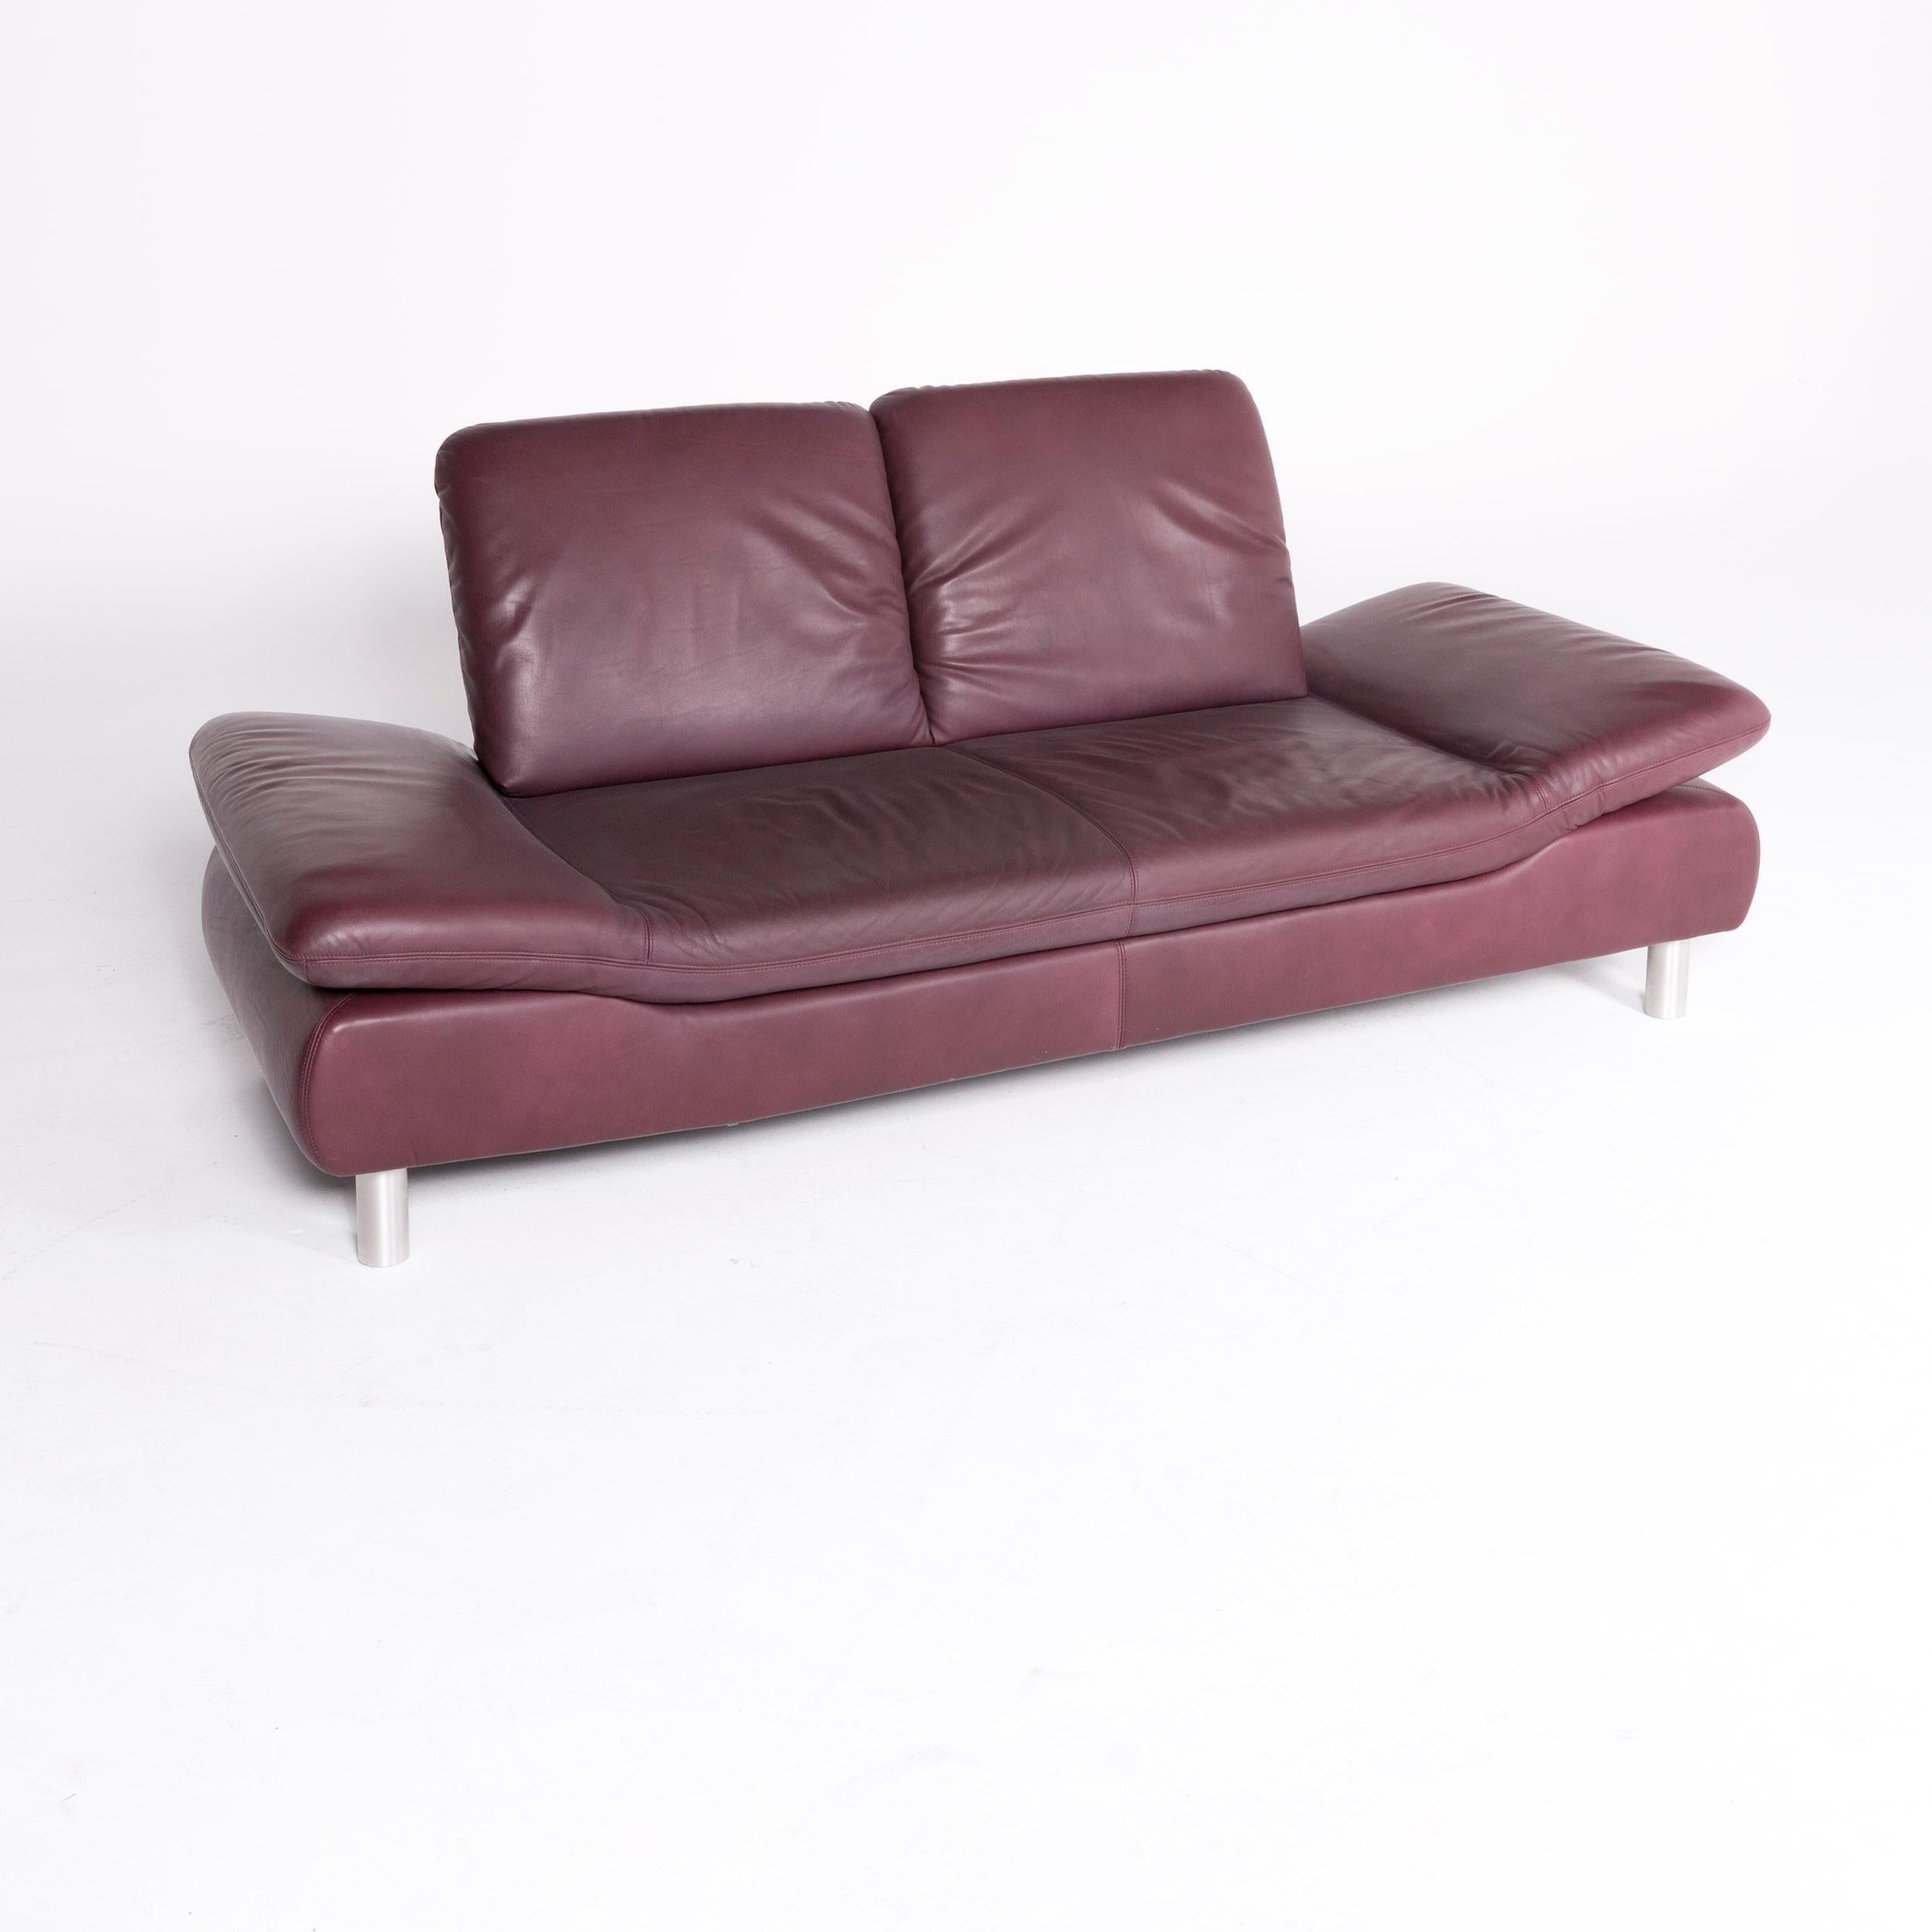 We bring to you a Koinor Rivoli designer leather sofa purple genuine leather two-seat couch.
 

Product measures in centimeters:

Depth: 89
Width: 205
Height: 87
Seat-height: 40
Rest-height: 49
Seat-depth: 57
Seat-width: 126
Back-height: